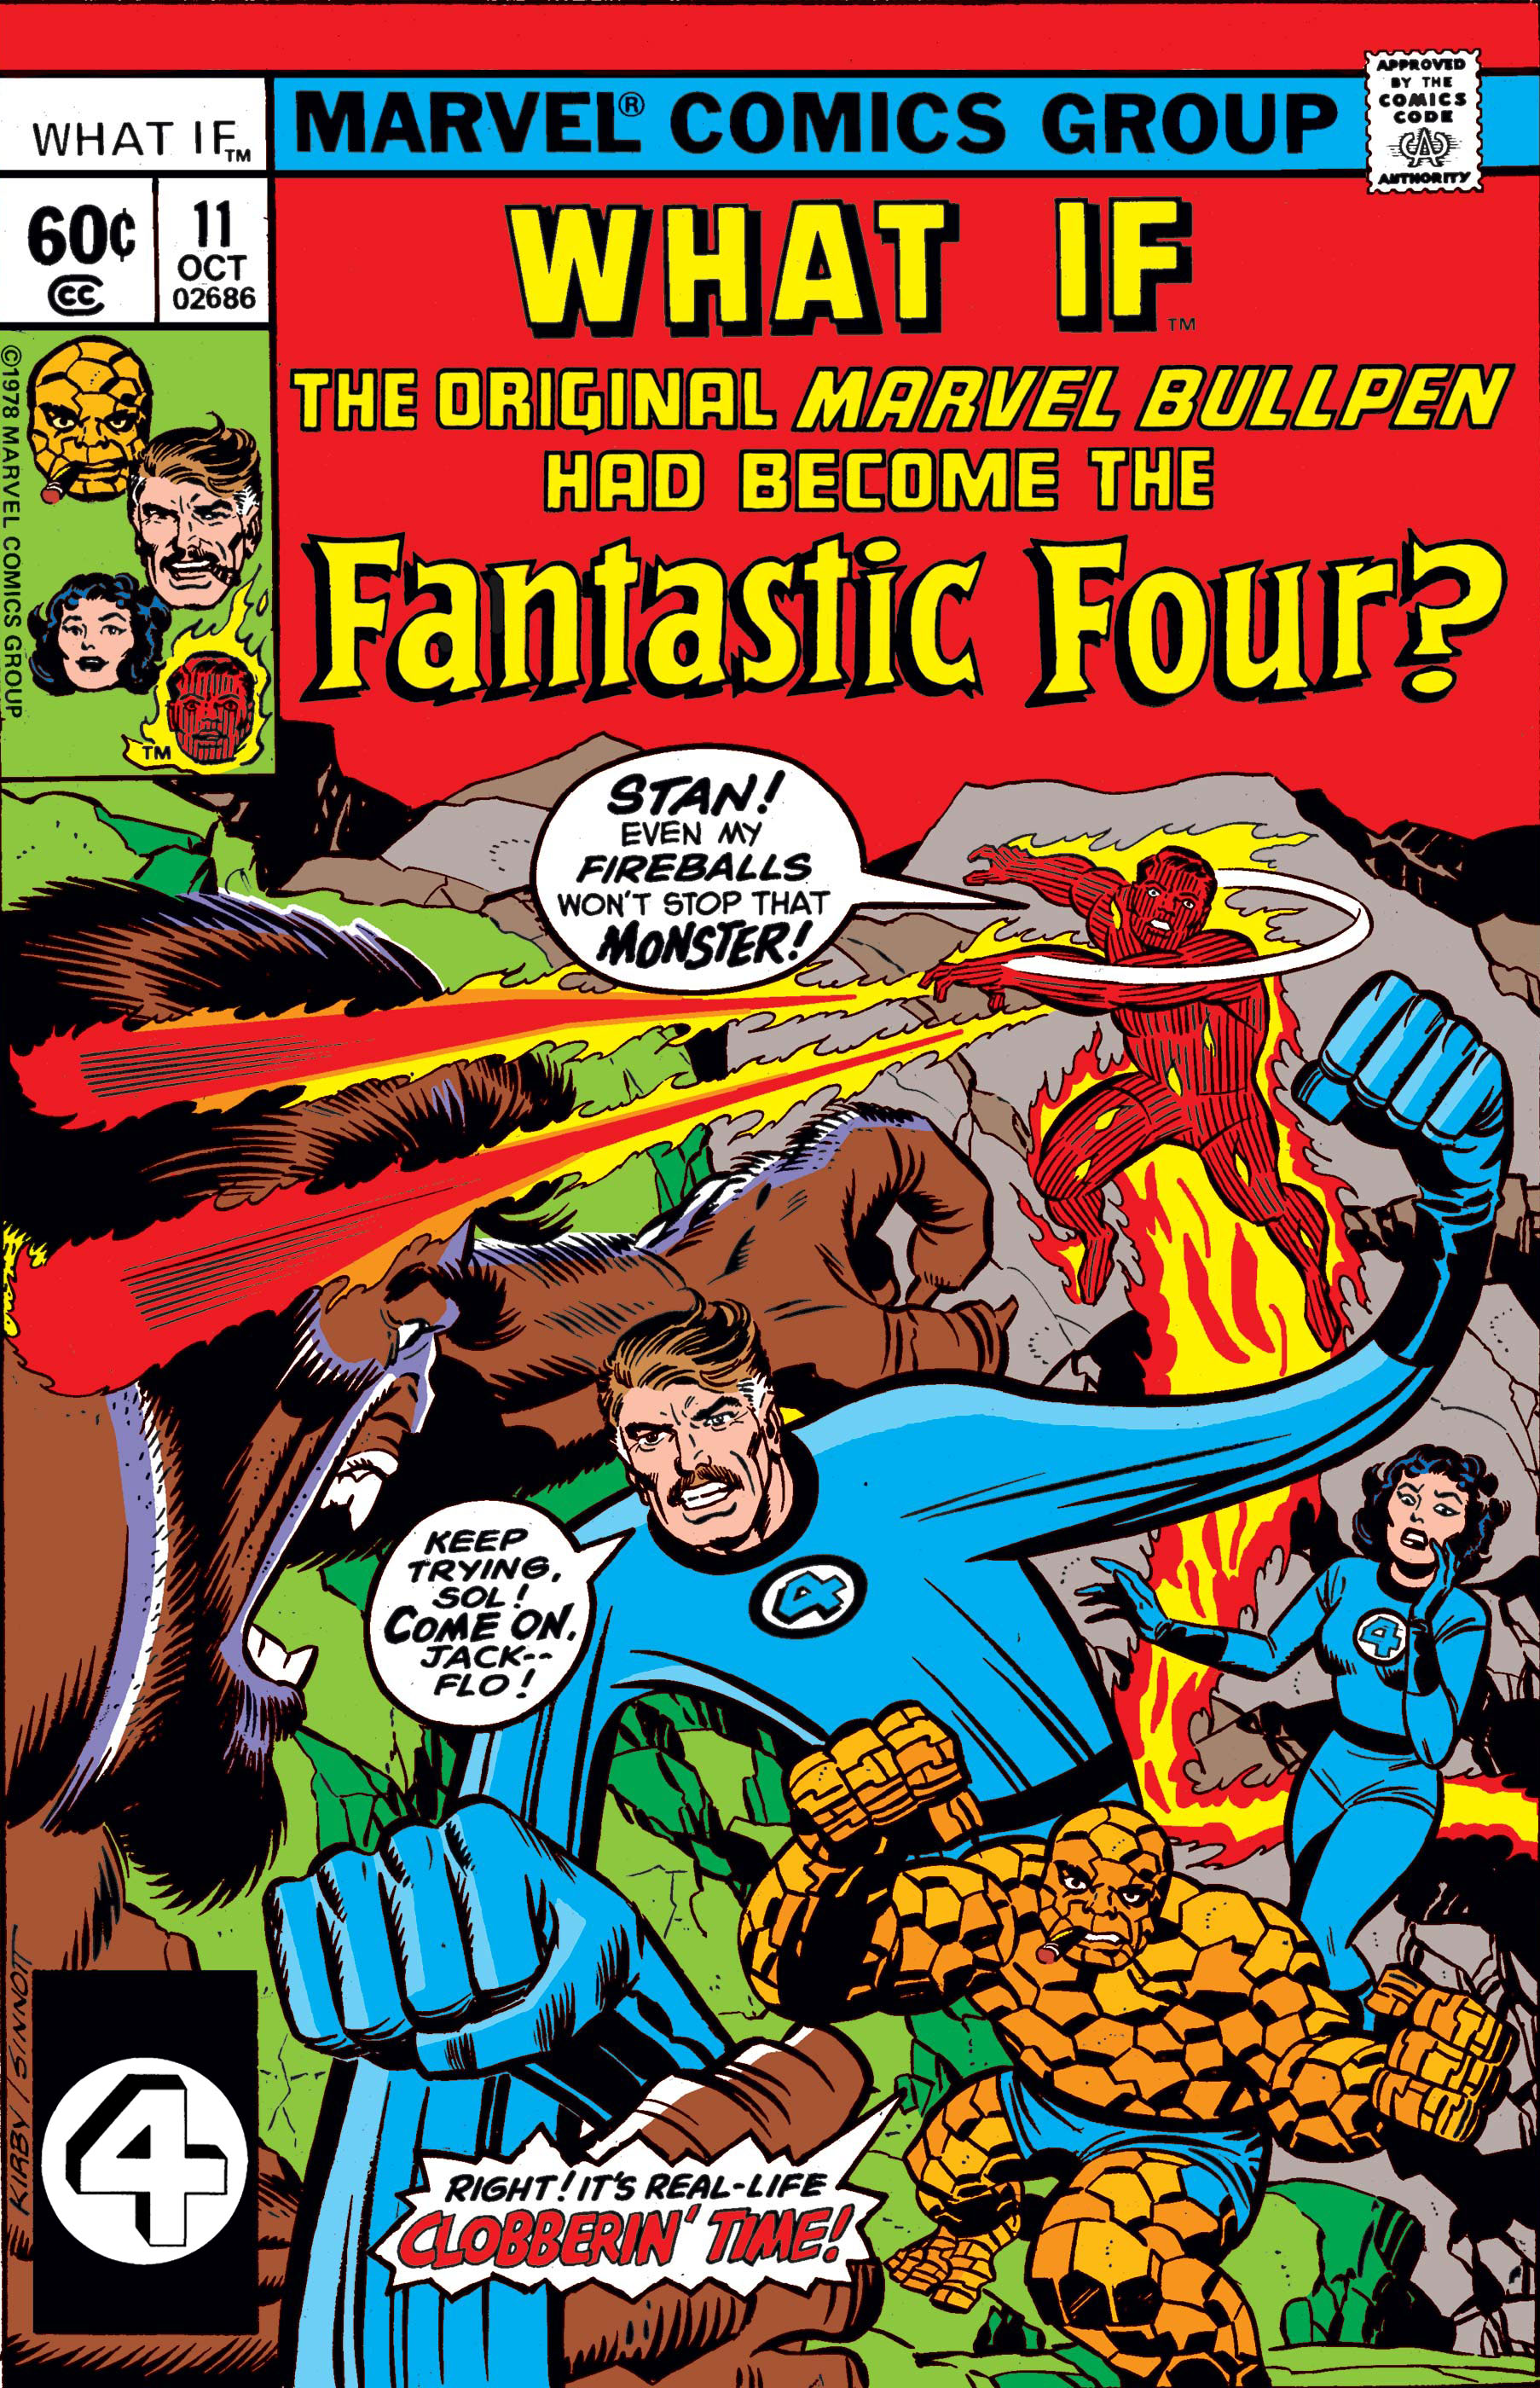 What if fantastic four